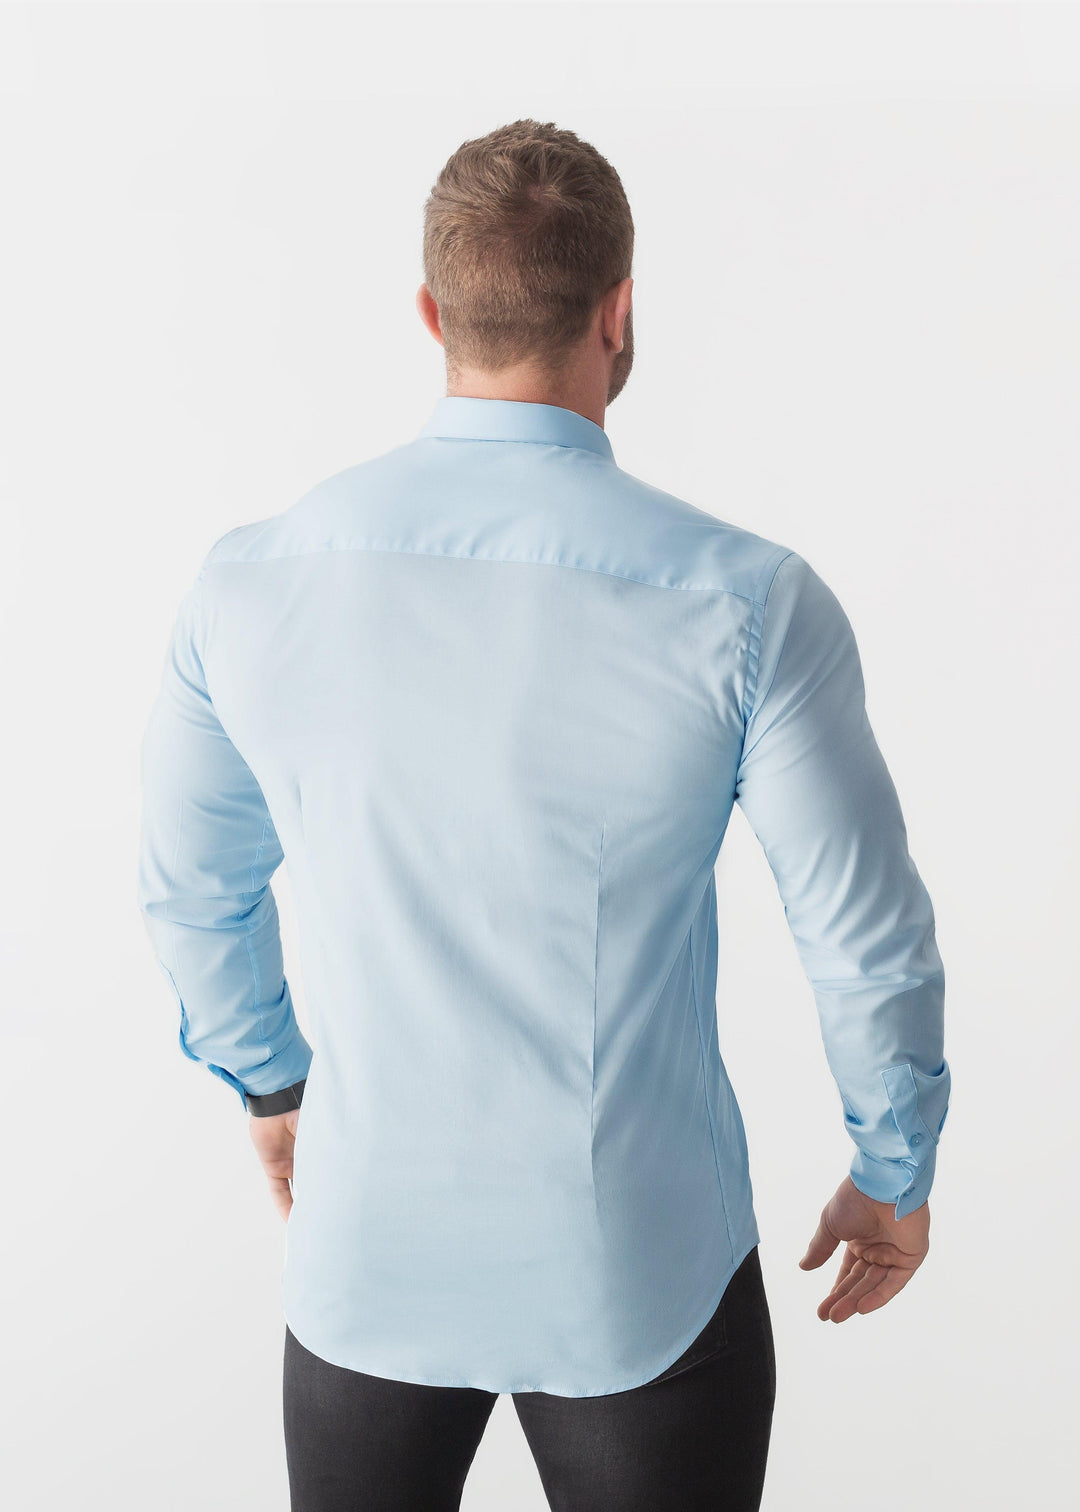 Sky Blue Tapered Fit Shirt. A Proportionally Fitted and Comfortable Muscle Fit Shirt. Ideal for bodybuilders